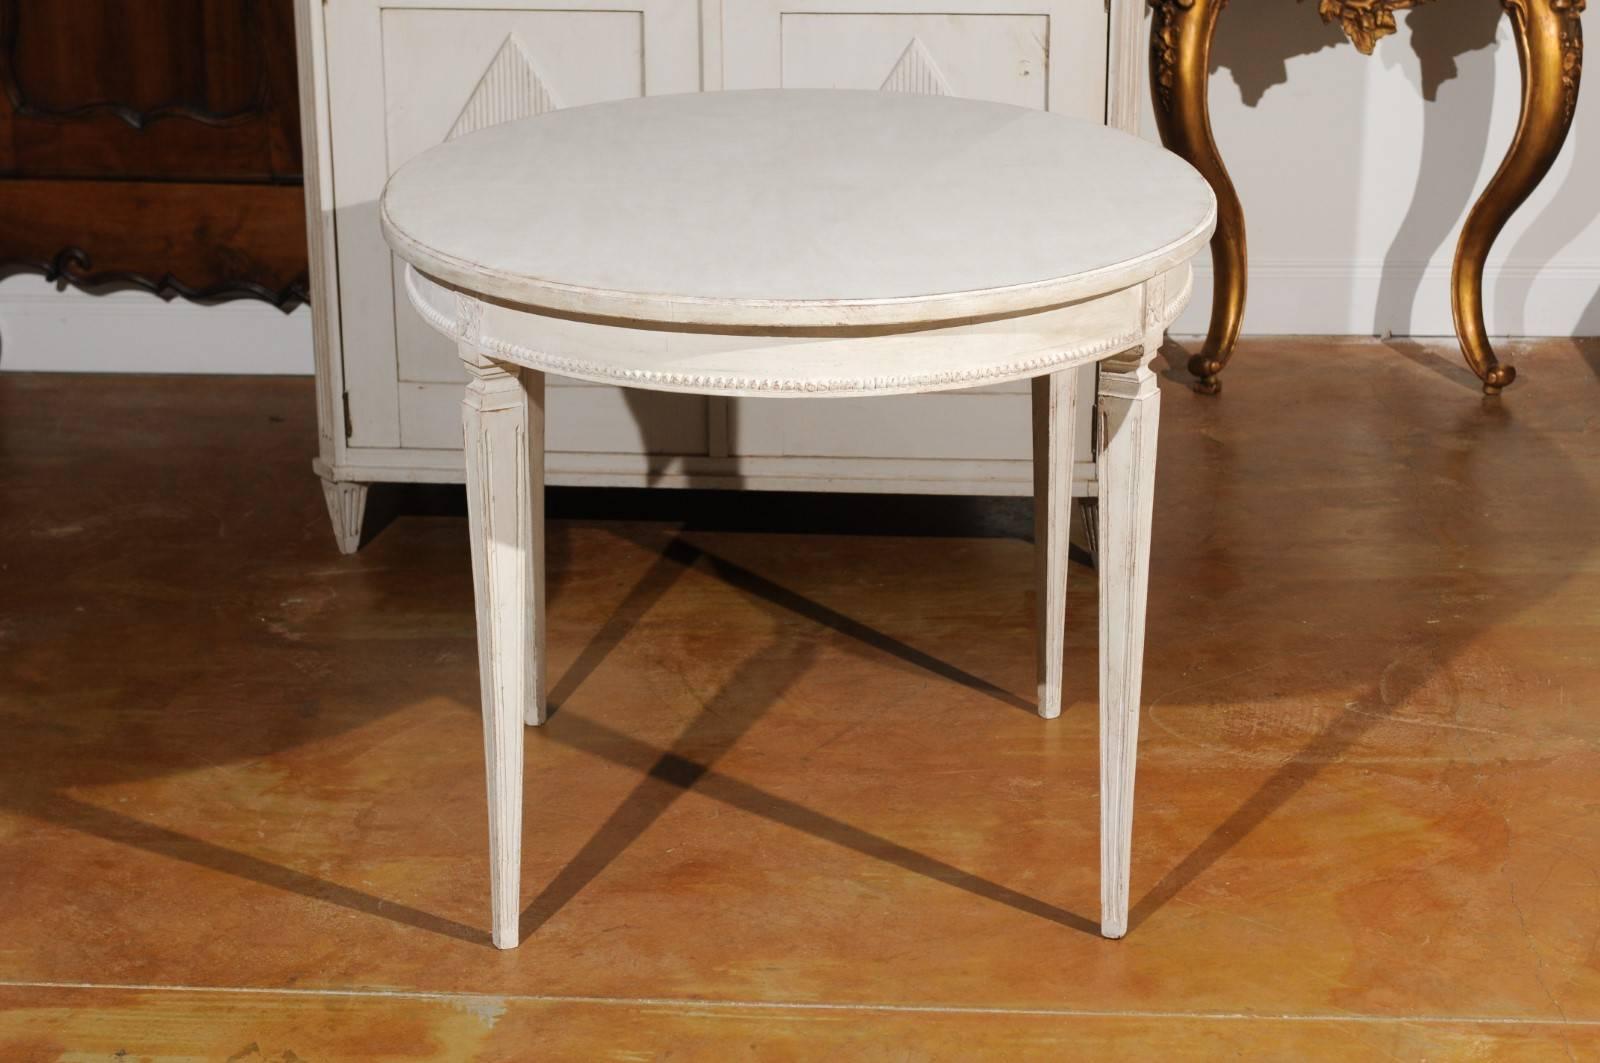 Gustavian Style 1900s Swedish Painted Oval Table from Växjö with Beaded Motifs 2